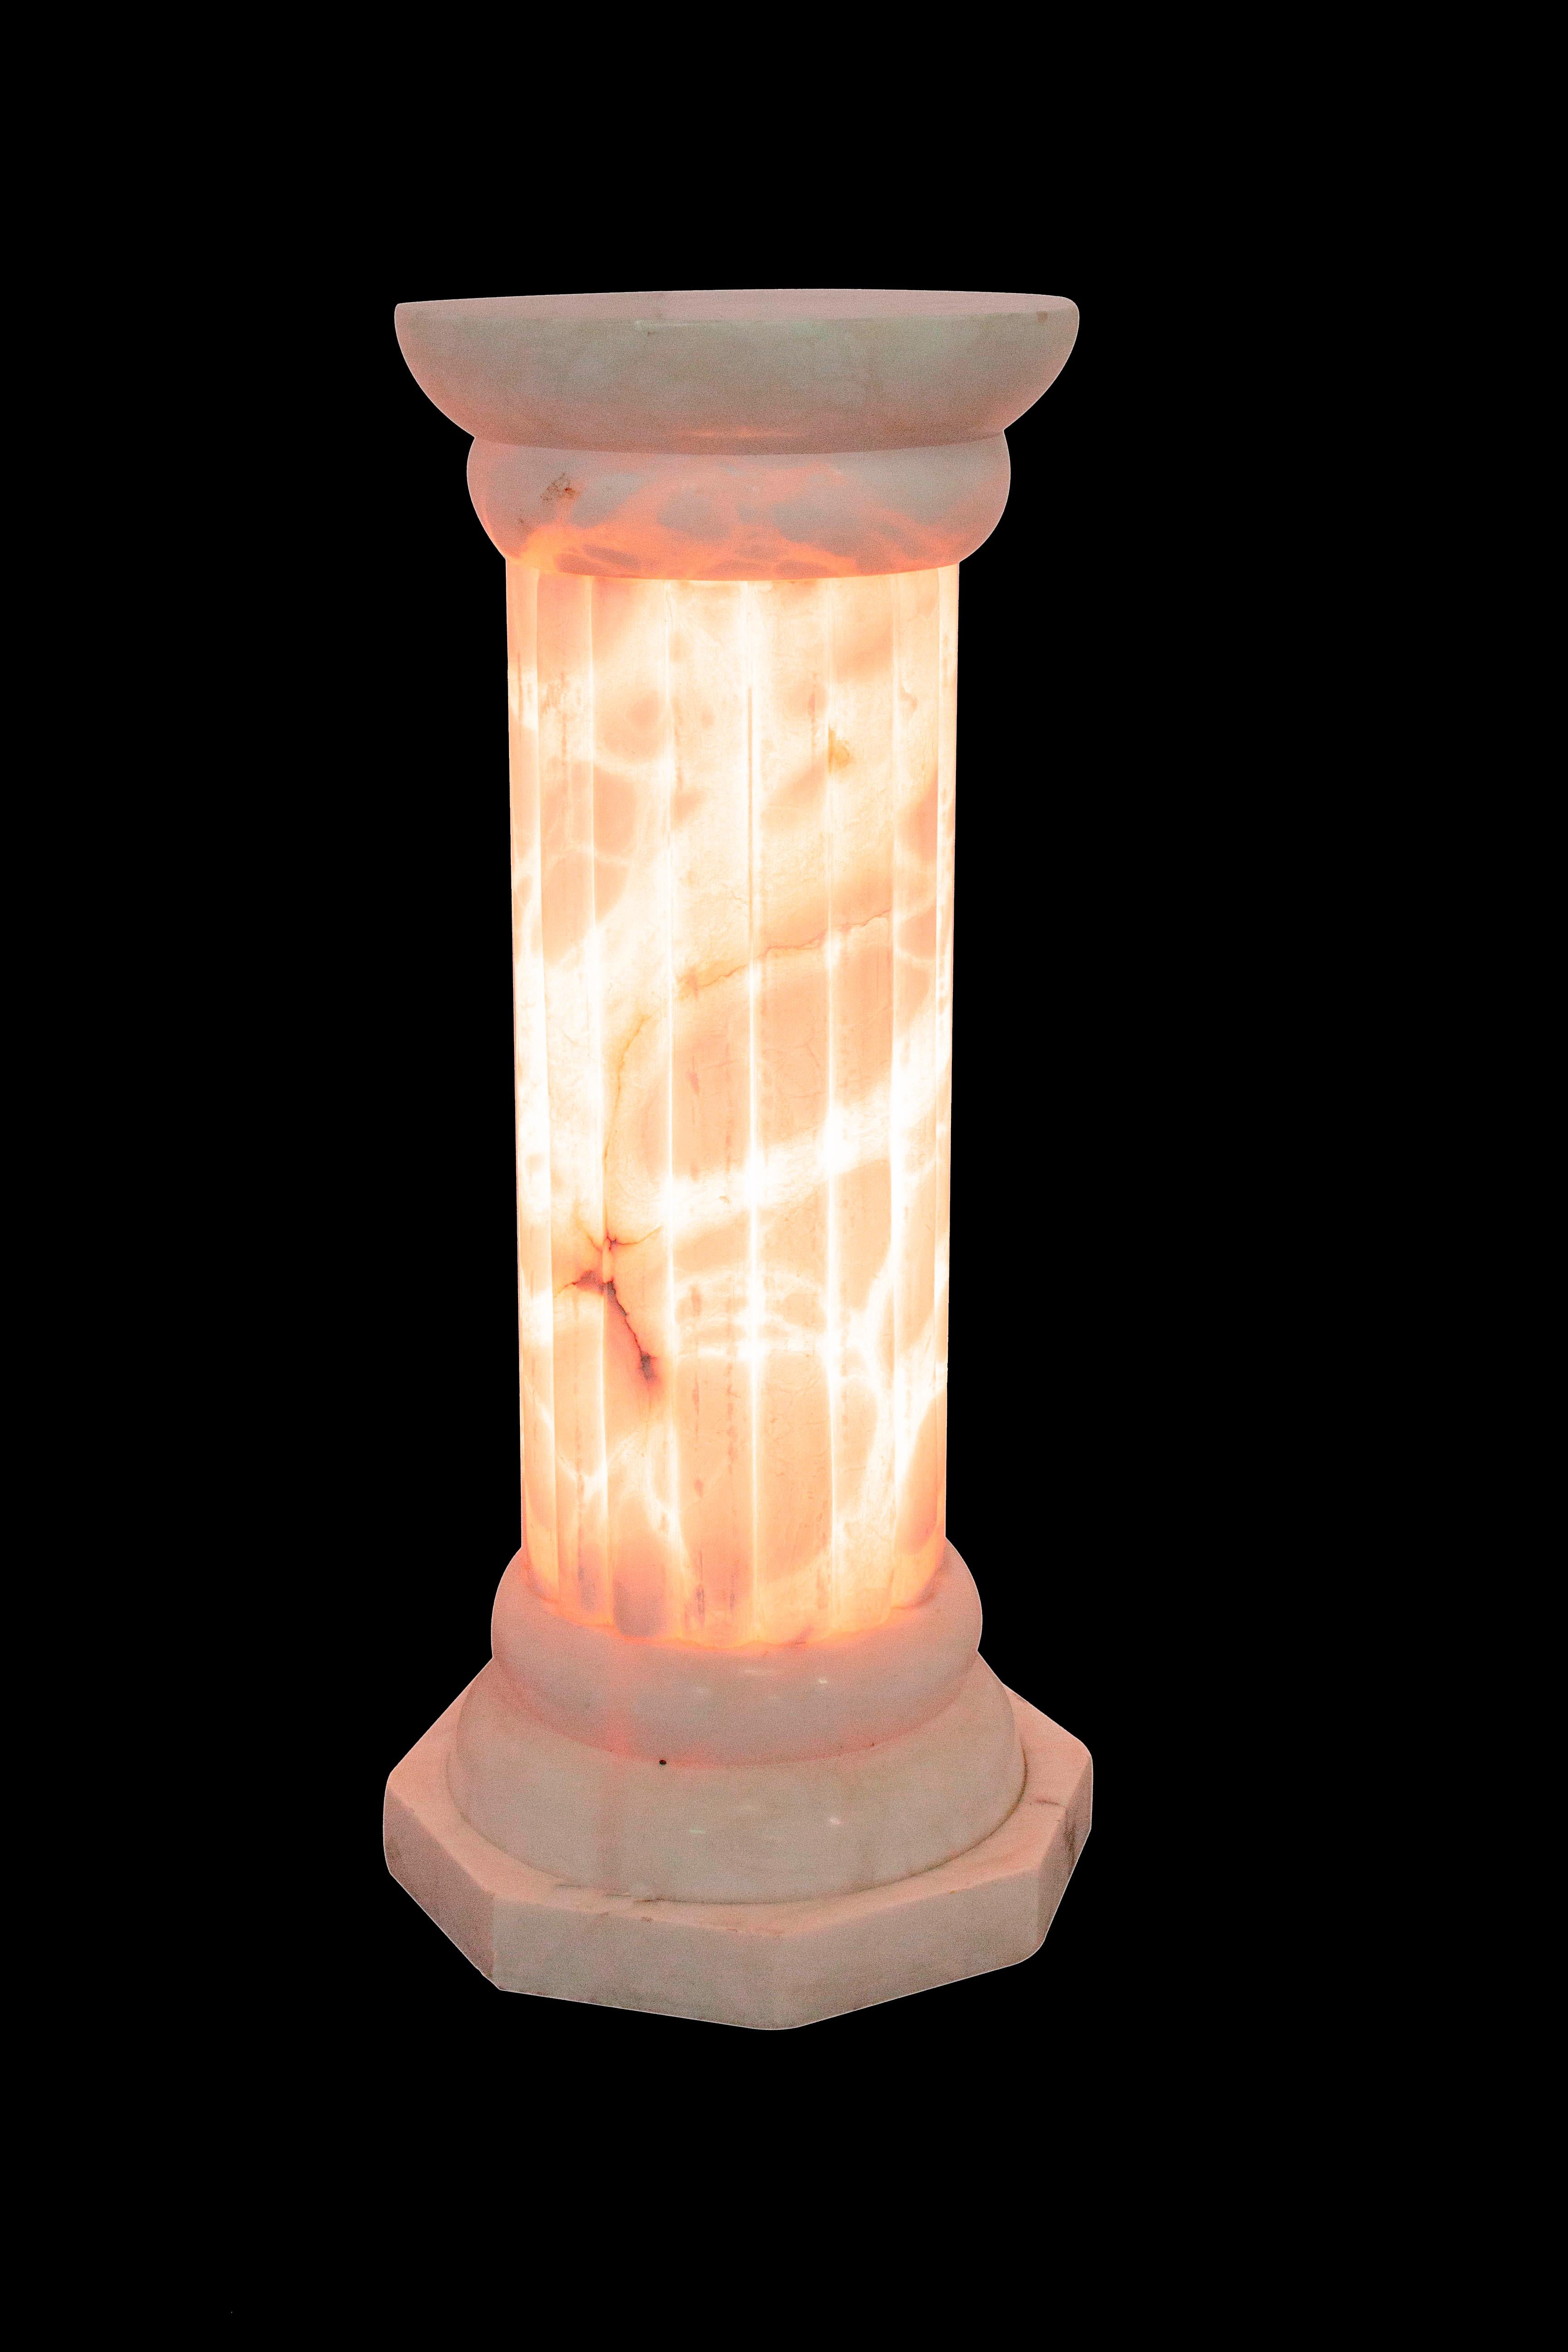 Neoclassic column early 20th century Art Deco Albaster lamp
French vintage alabaster column lamp with beautiful veining.
Very soft and warm light in your interior, patio or garden.
Italian white albaster marble with black veining.
Handcrafted in